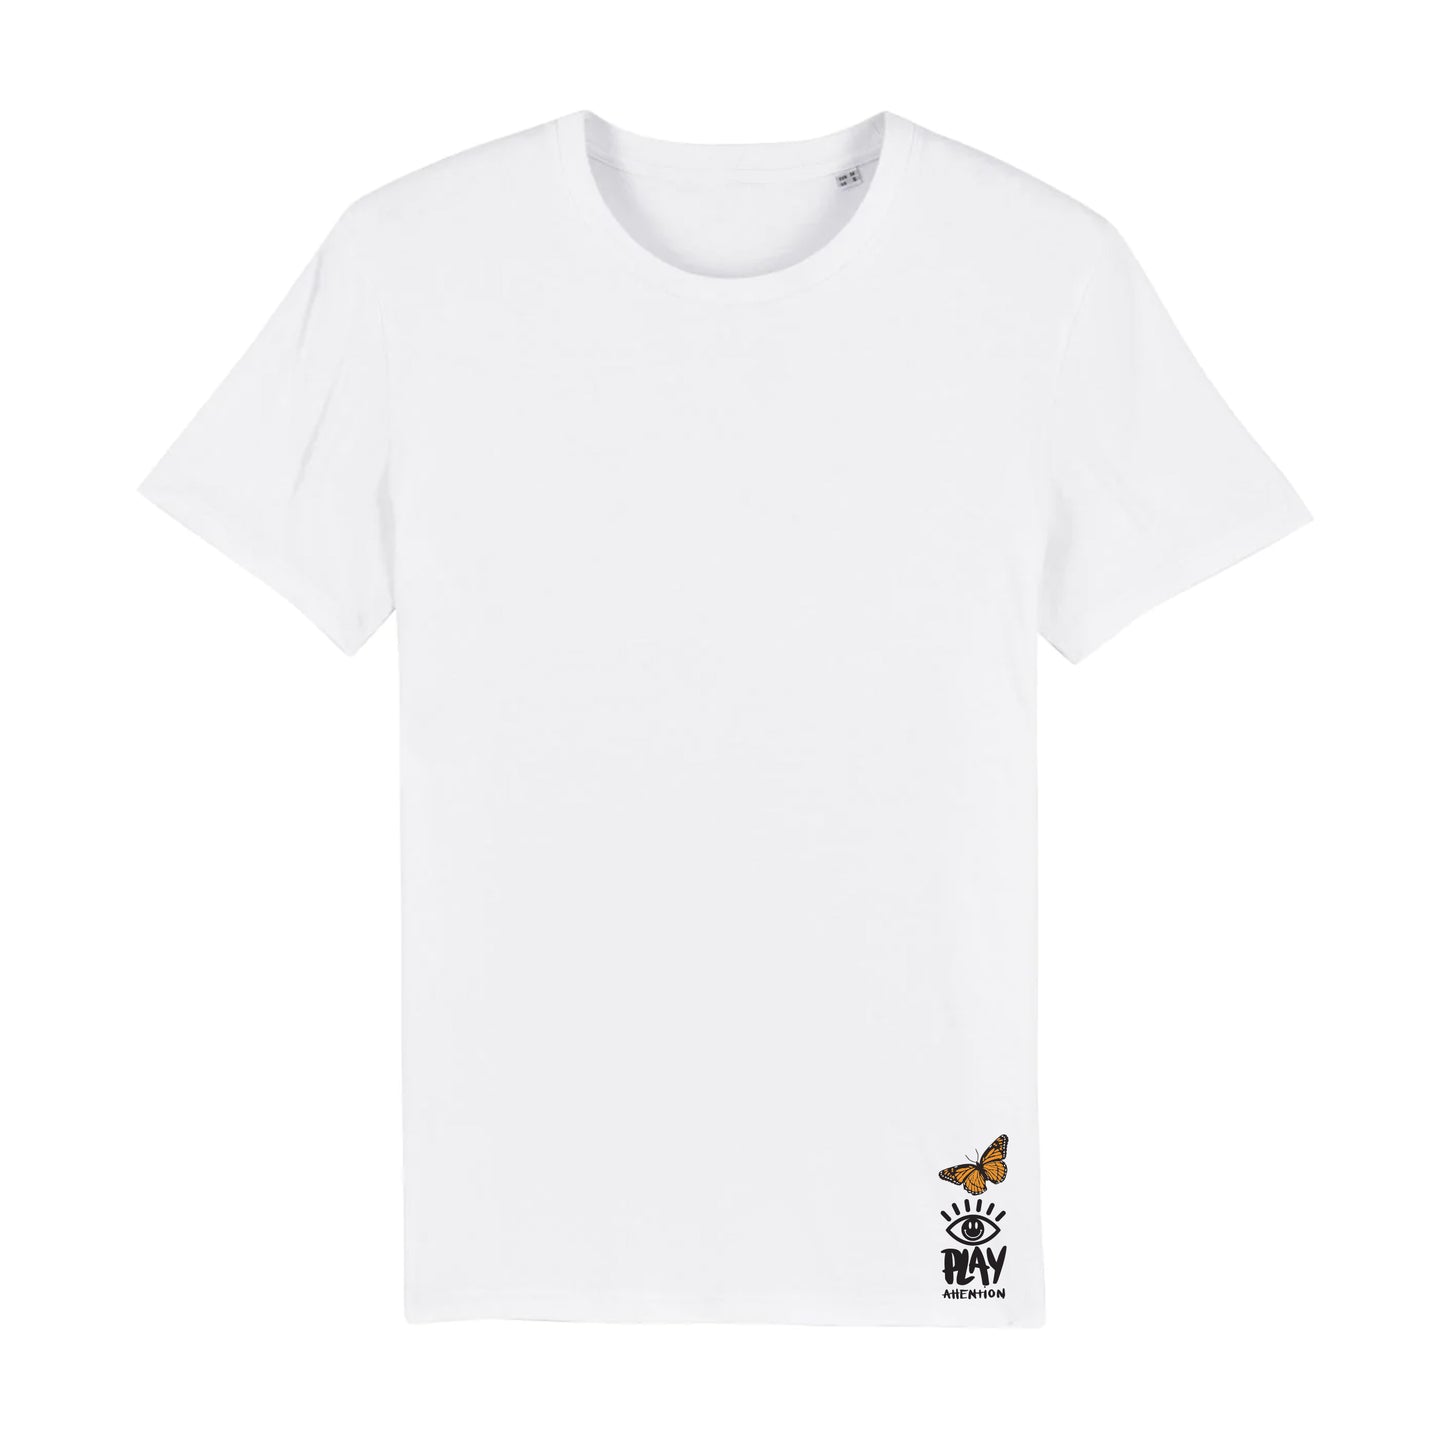 Secret Garden Party x Play Attention - The Pagoda Stage T-Shirt (White / Unisex Fit)